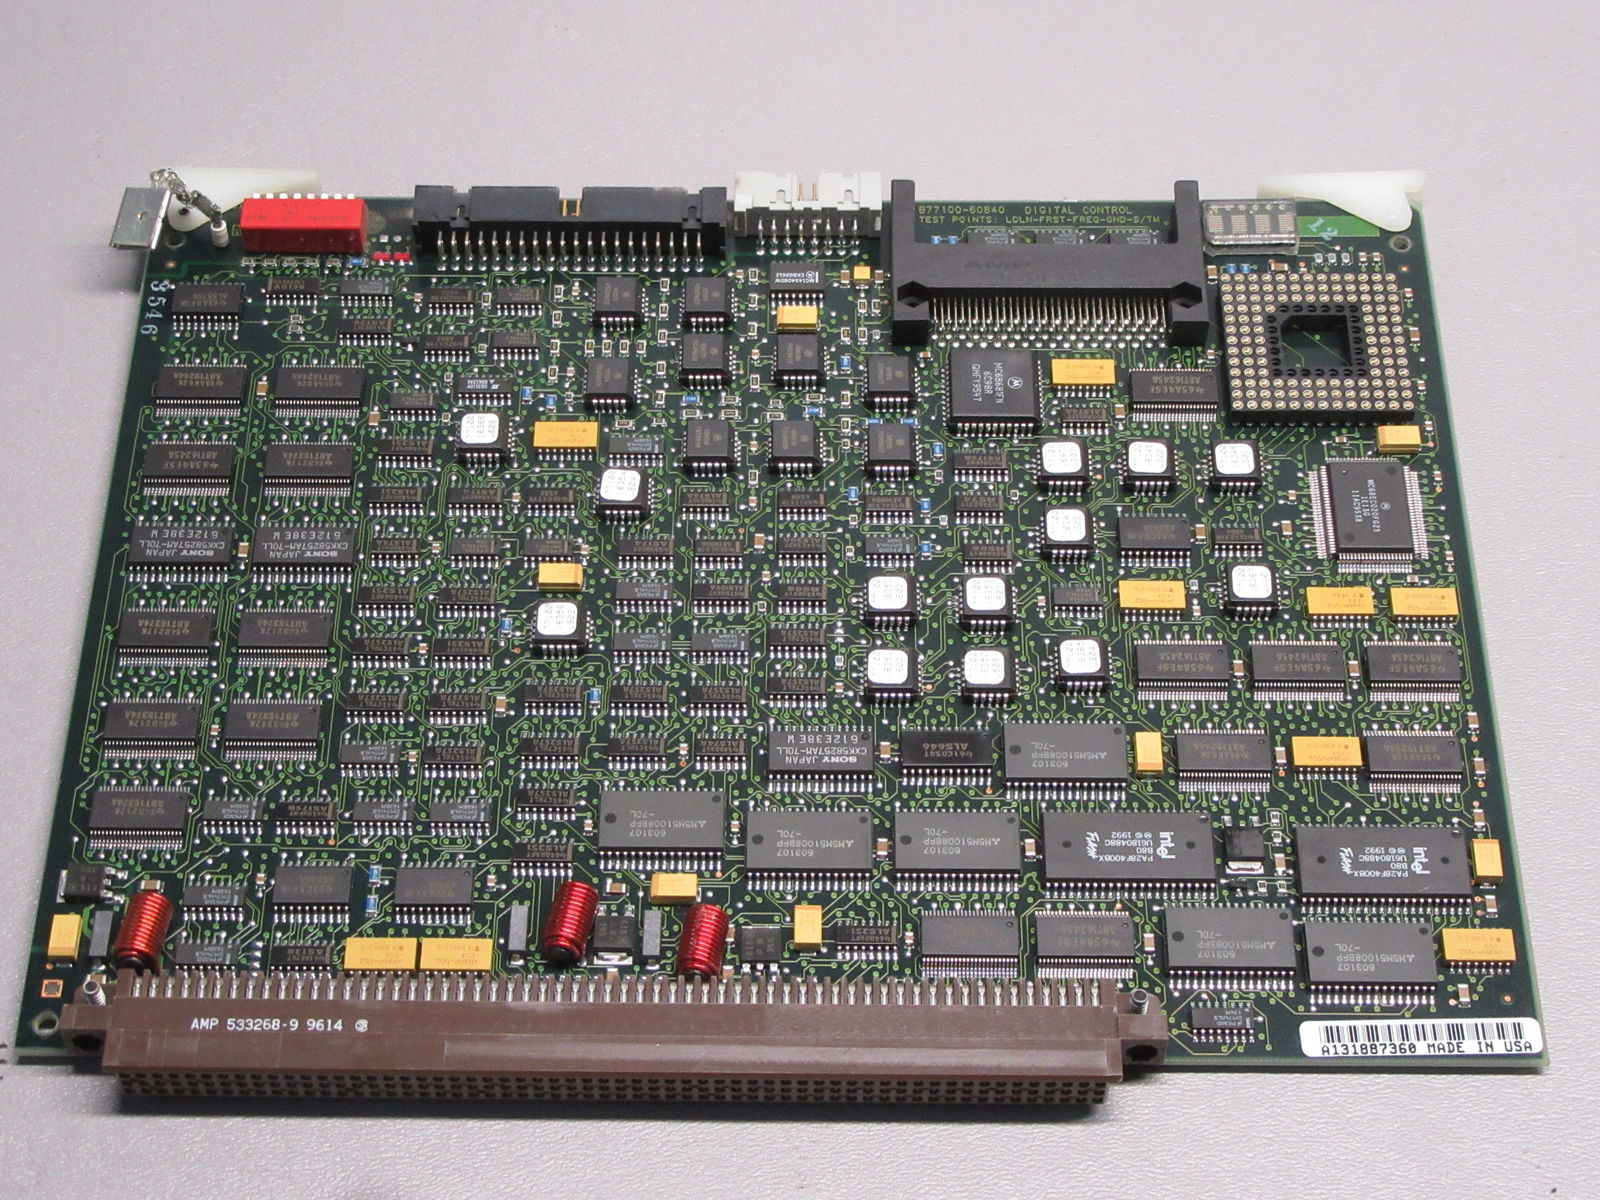 a close up of a computer board with many components